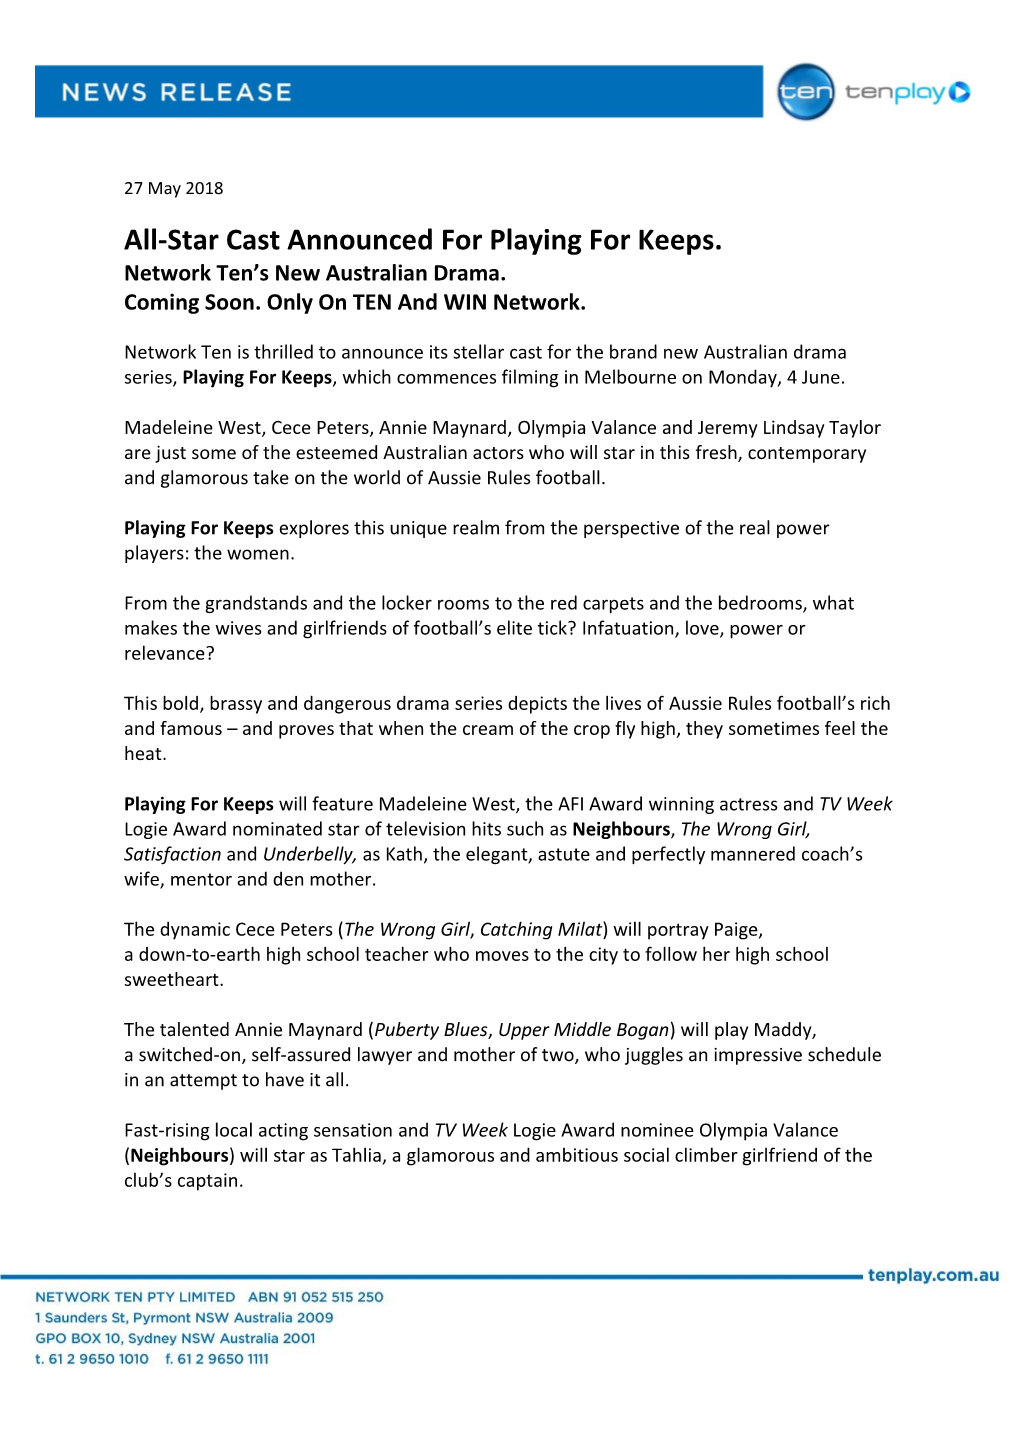 All-Star Cast Announced for Playing for Keeps. Network Ten’S New Australian Drama